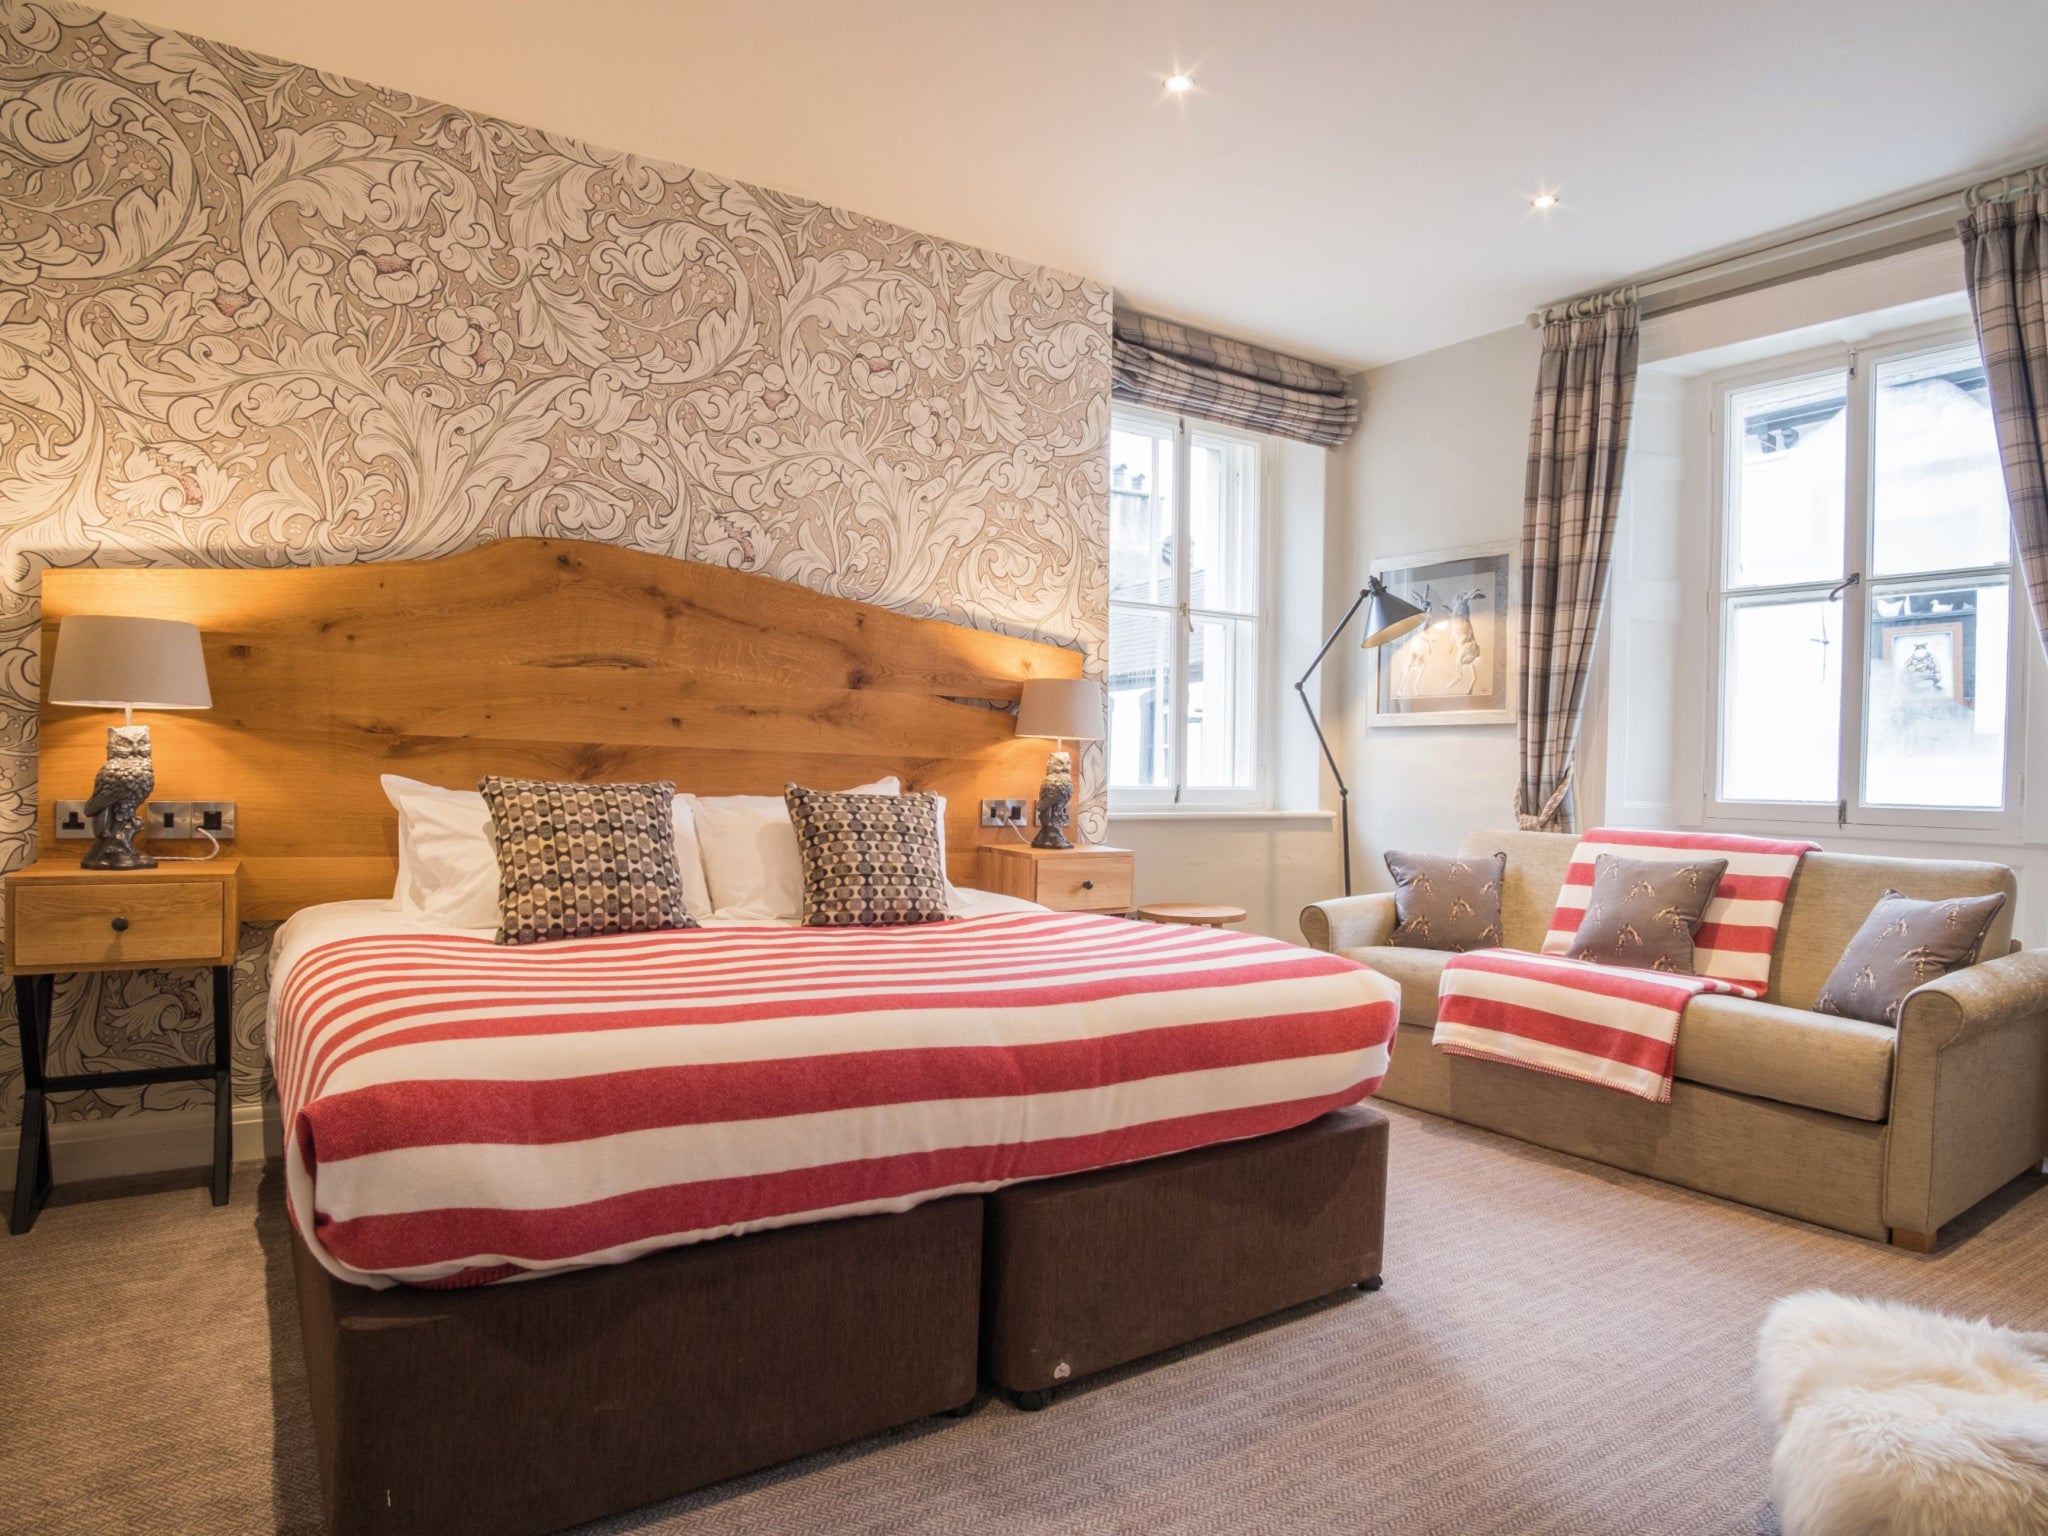 Luxury wallpaper and bespoke oak furniture make for a homely stay